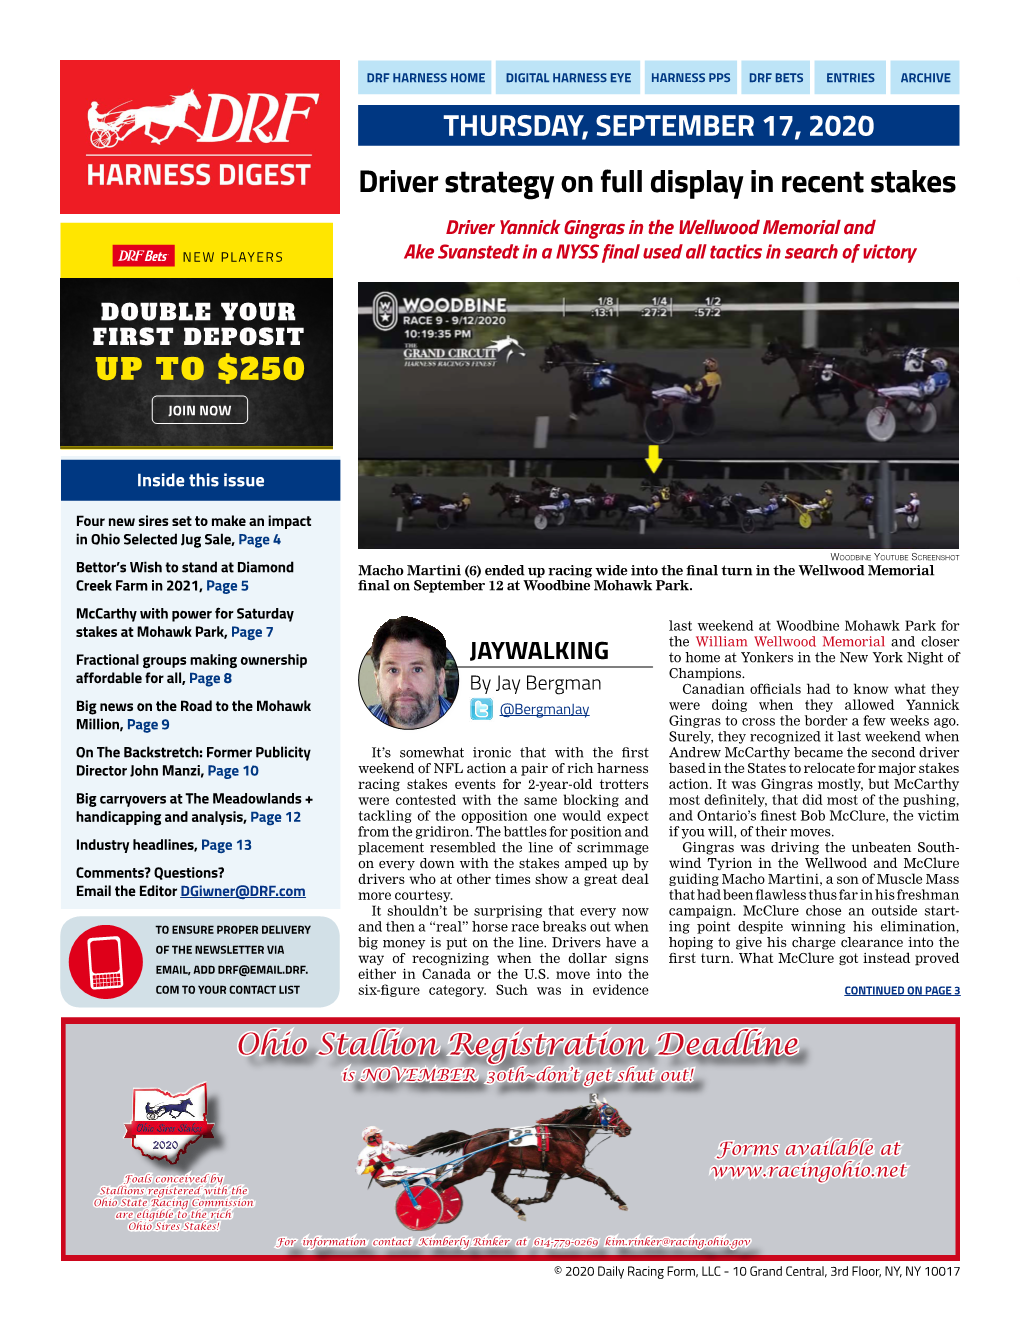 Driver Strategy on Full Display in Recent Stakes